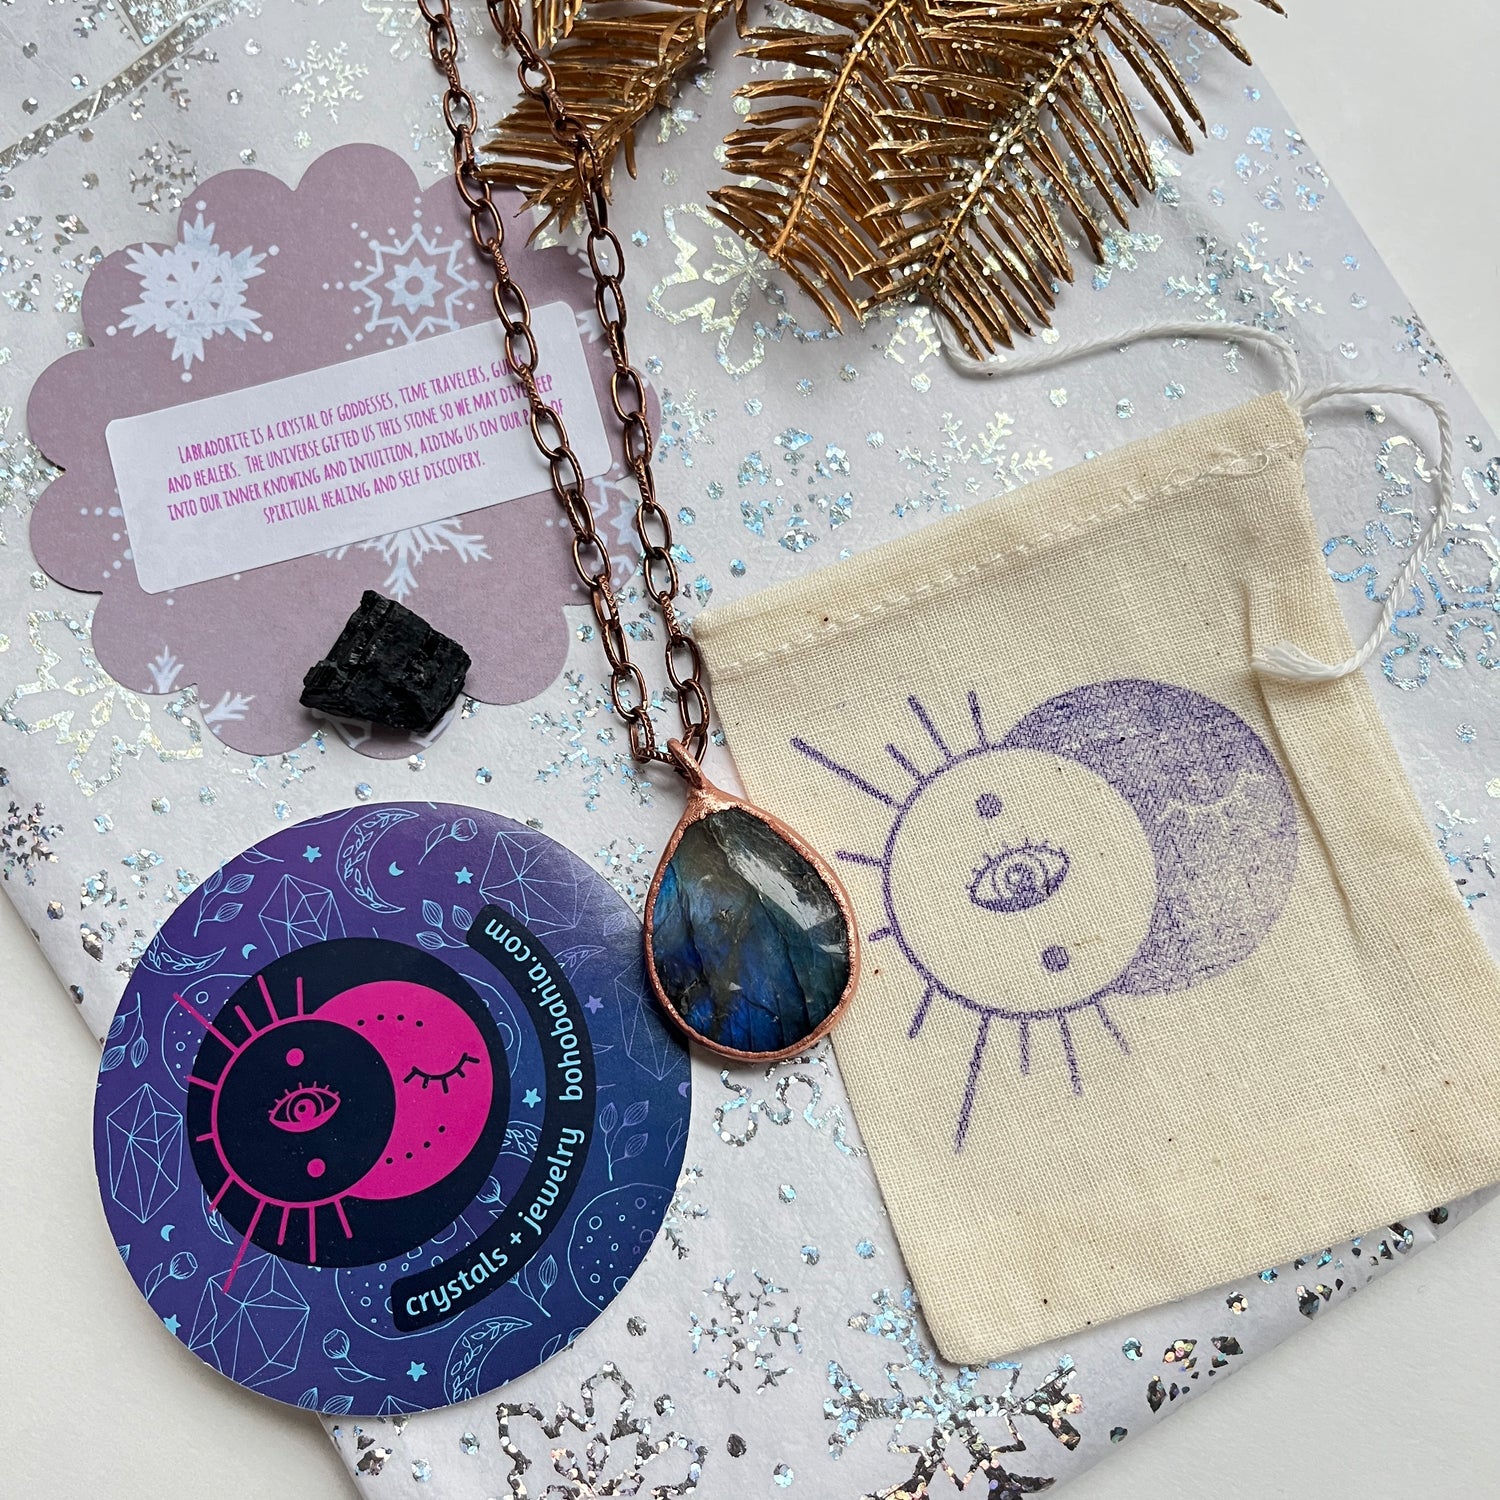 Packaging for healing crystals and handmade jewelry includes a gift bag, metaphysical crystal card, and black tourmaline. 